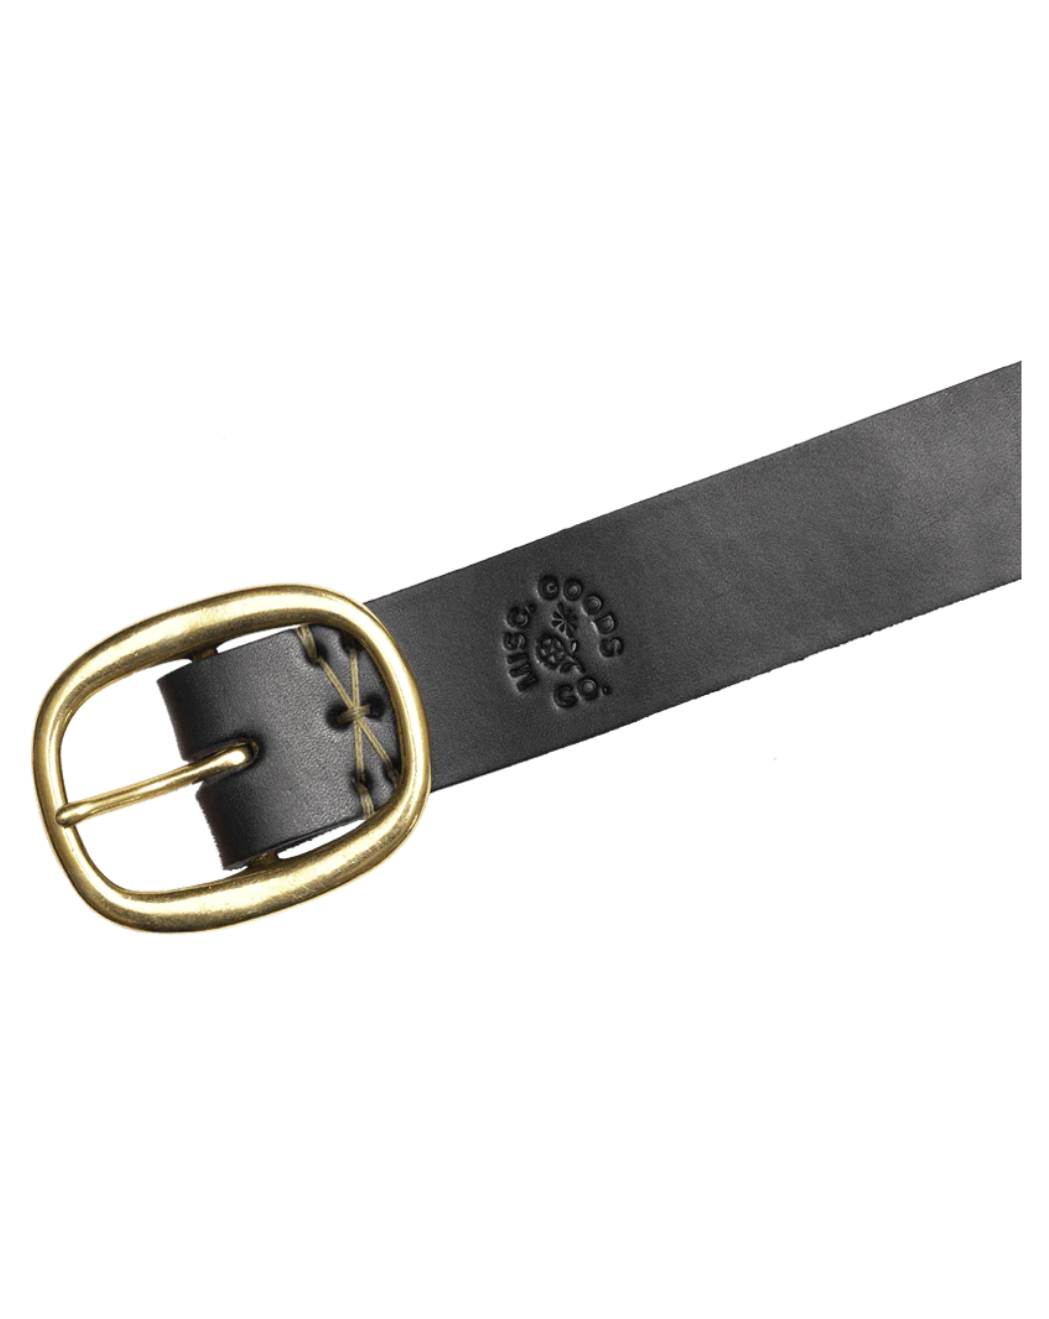 MISC Goods | Moon is Down Leather Belt | Black